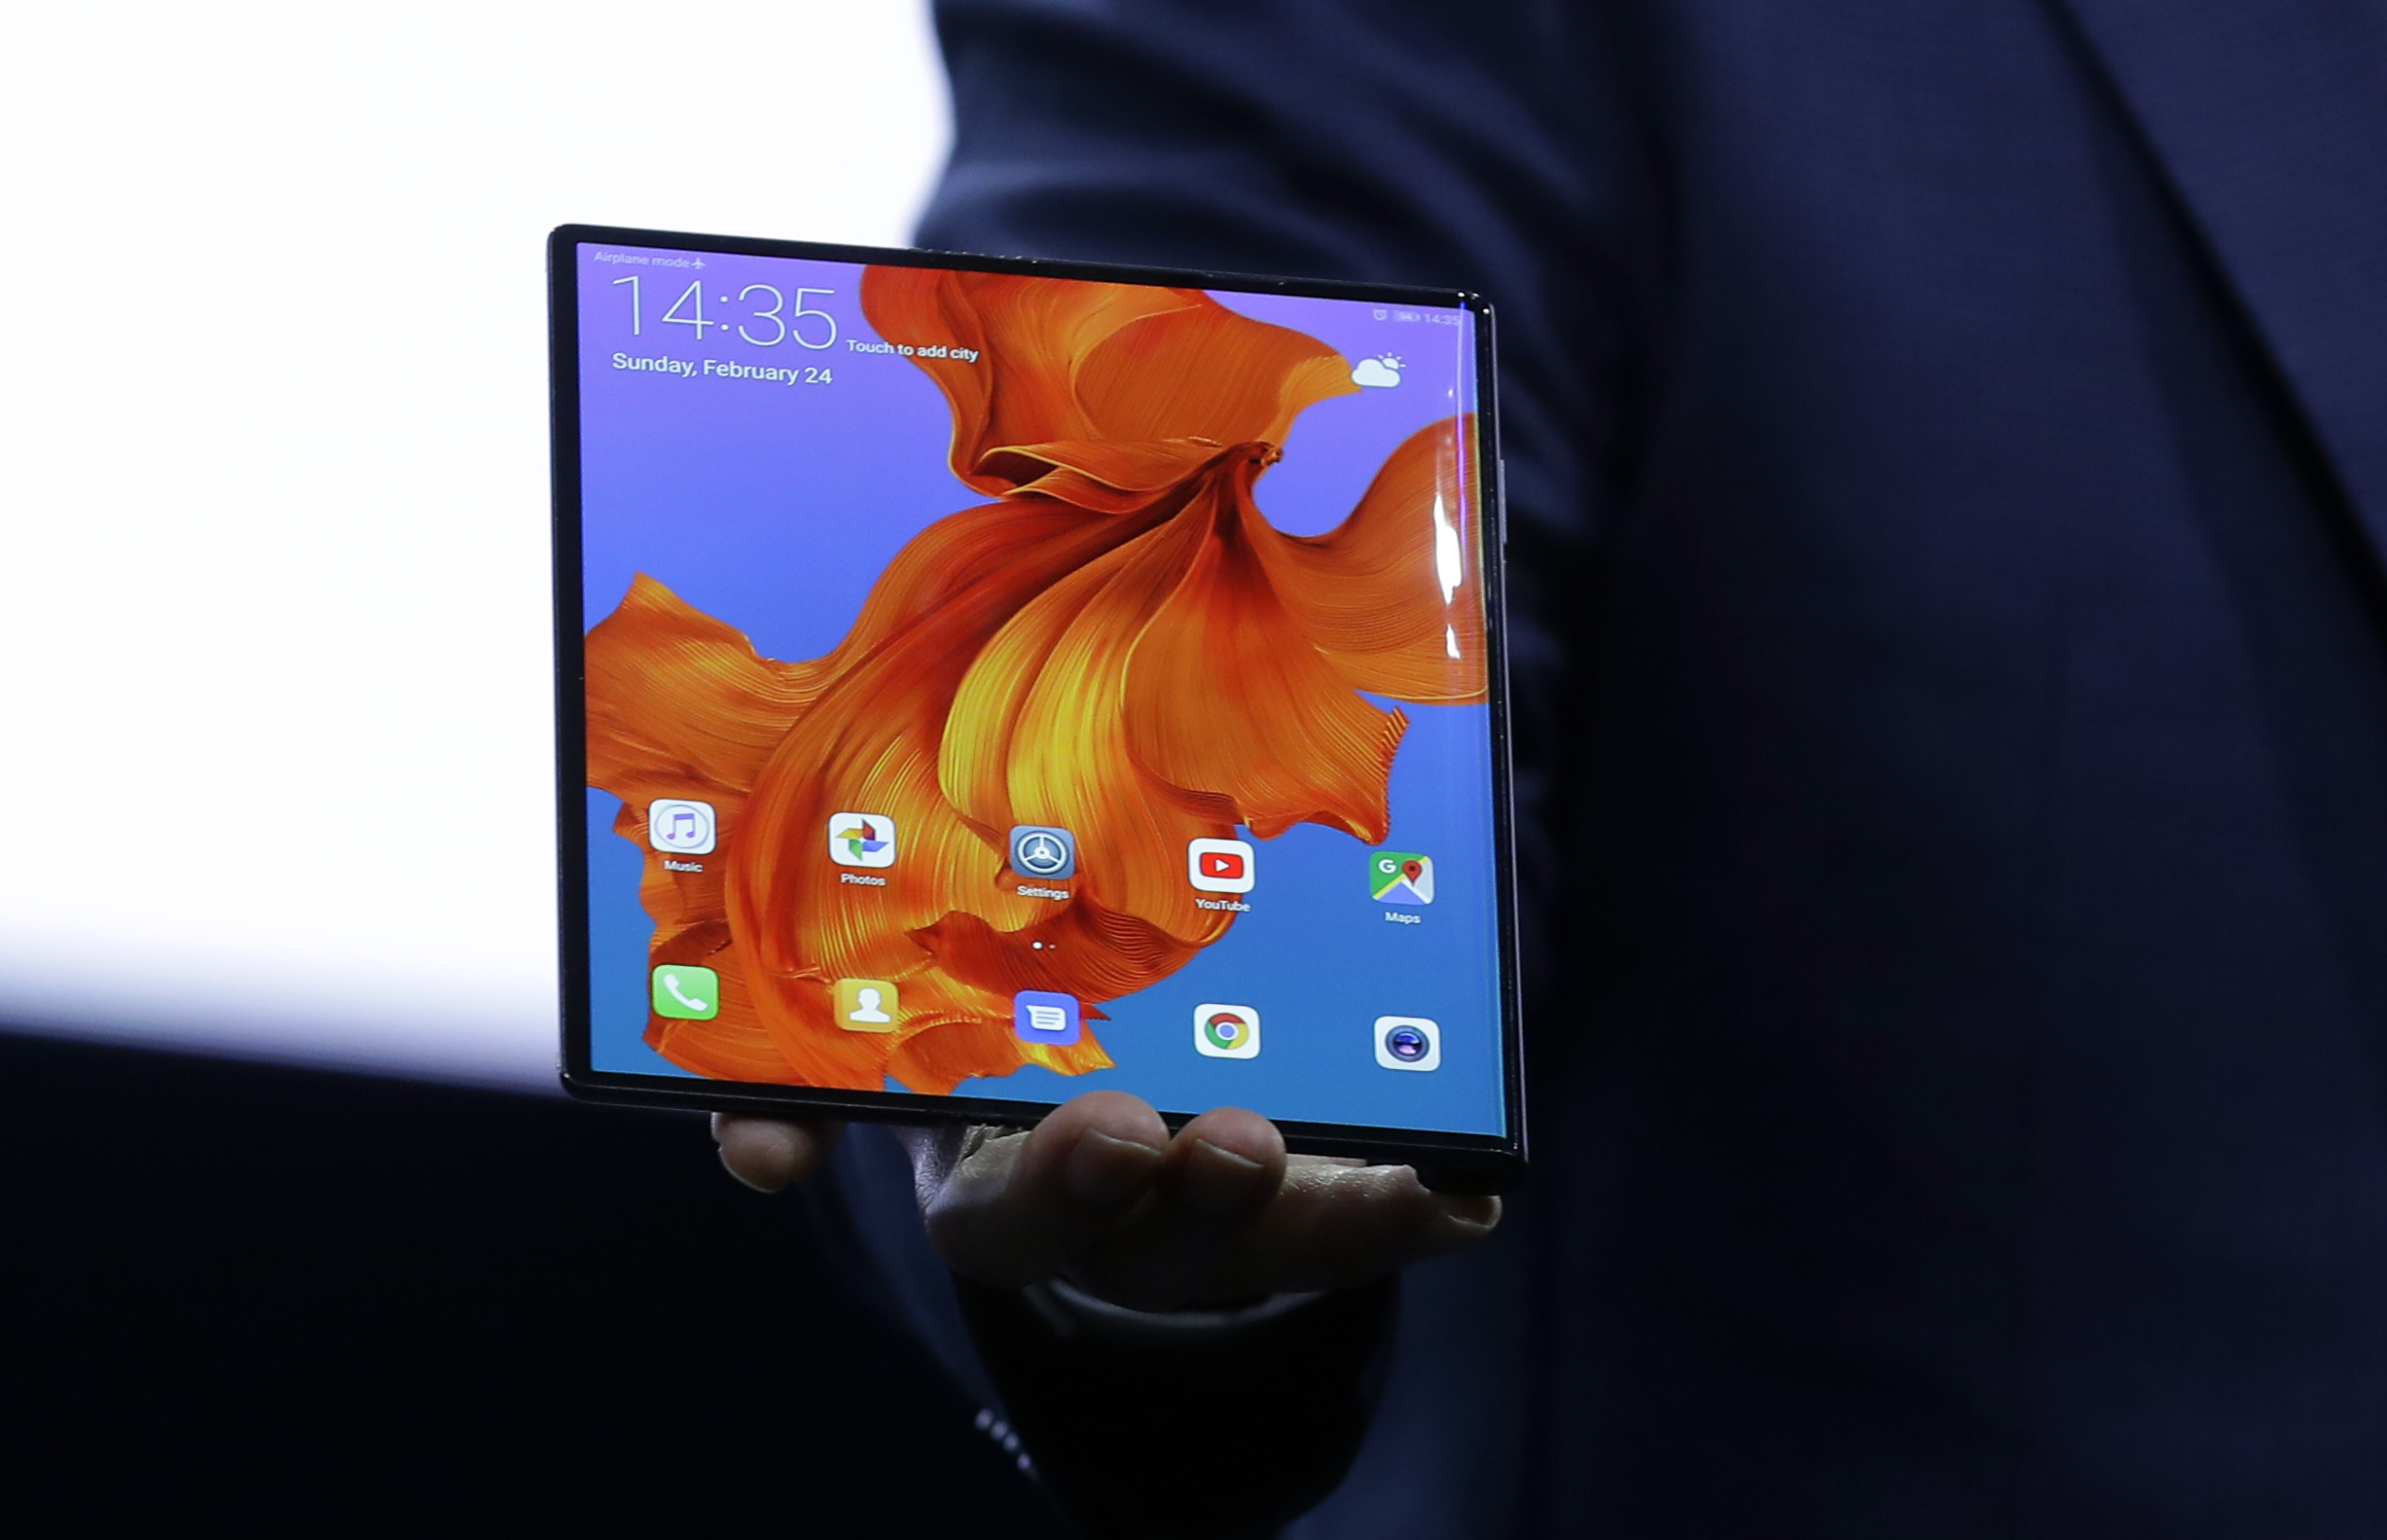 jammer gun purchases journal - China’s Huawei Unveils 5G Phone with Folding Screen